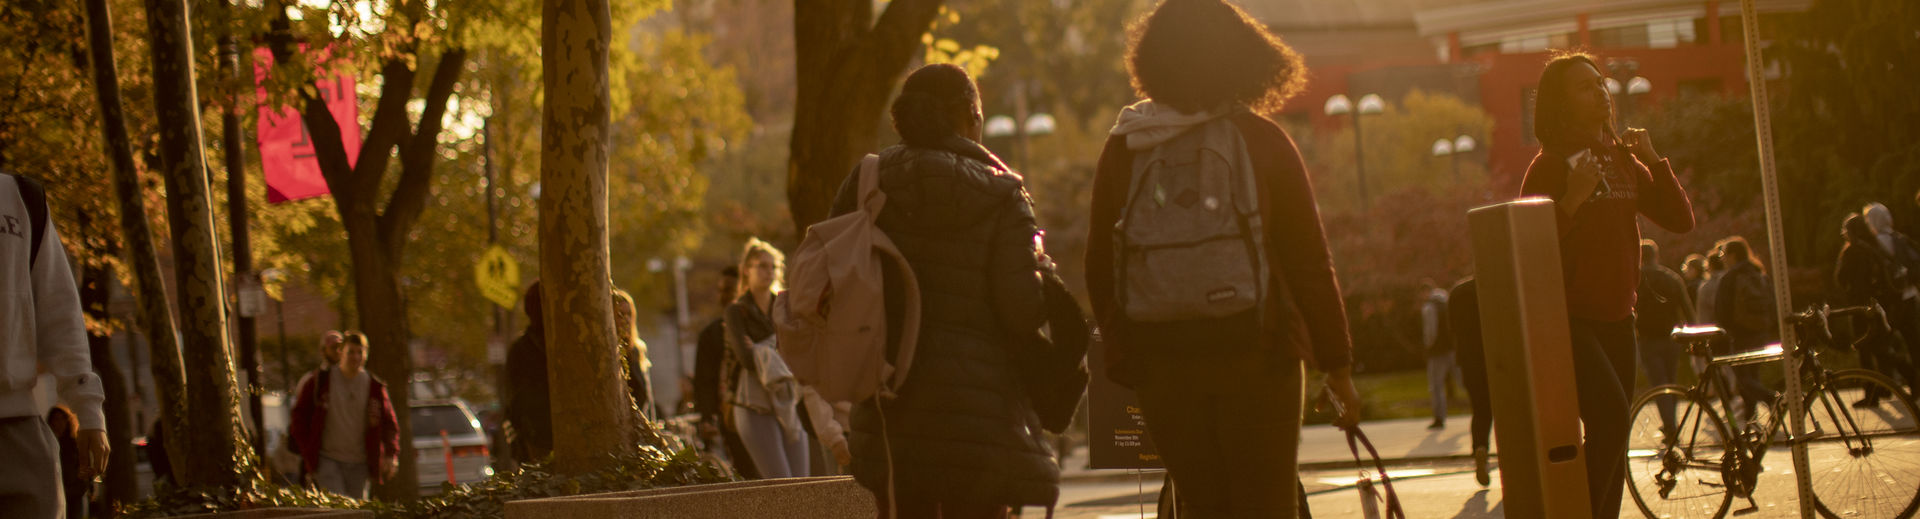 Students walking on campus in Fall